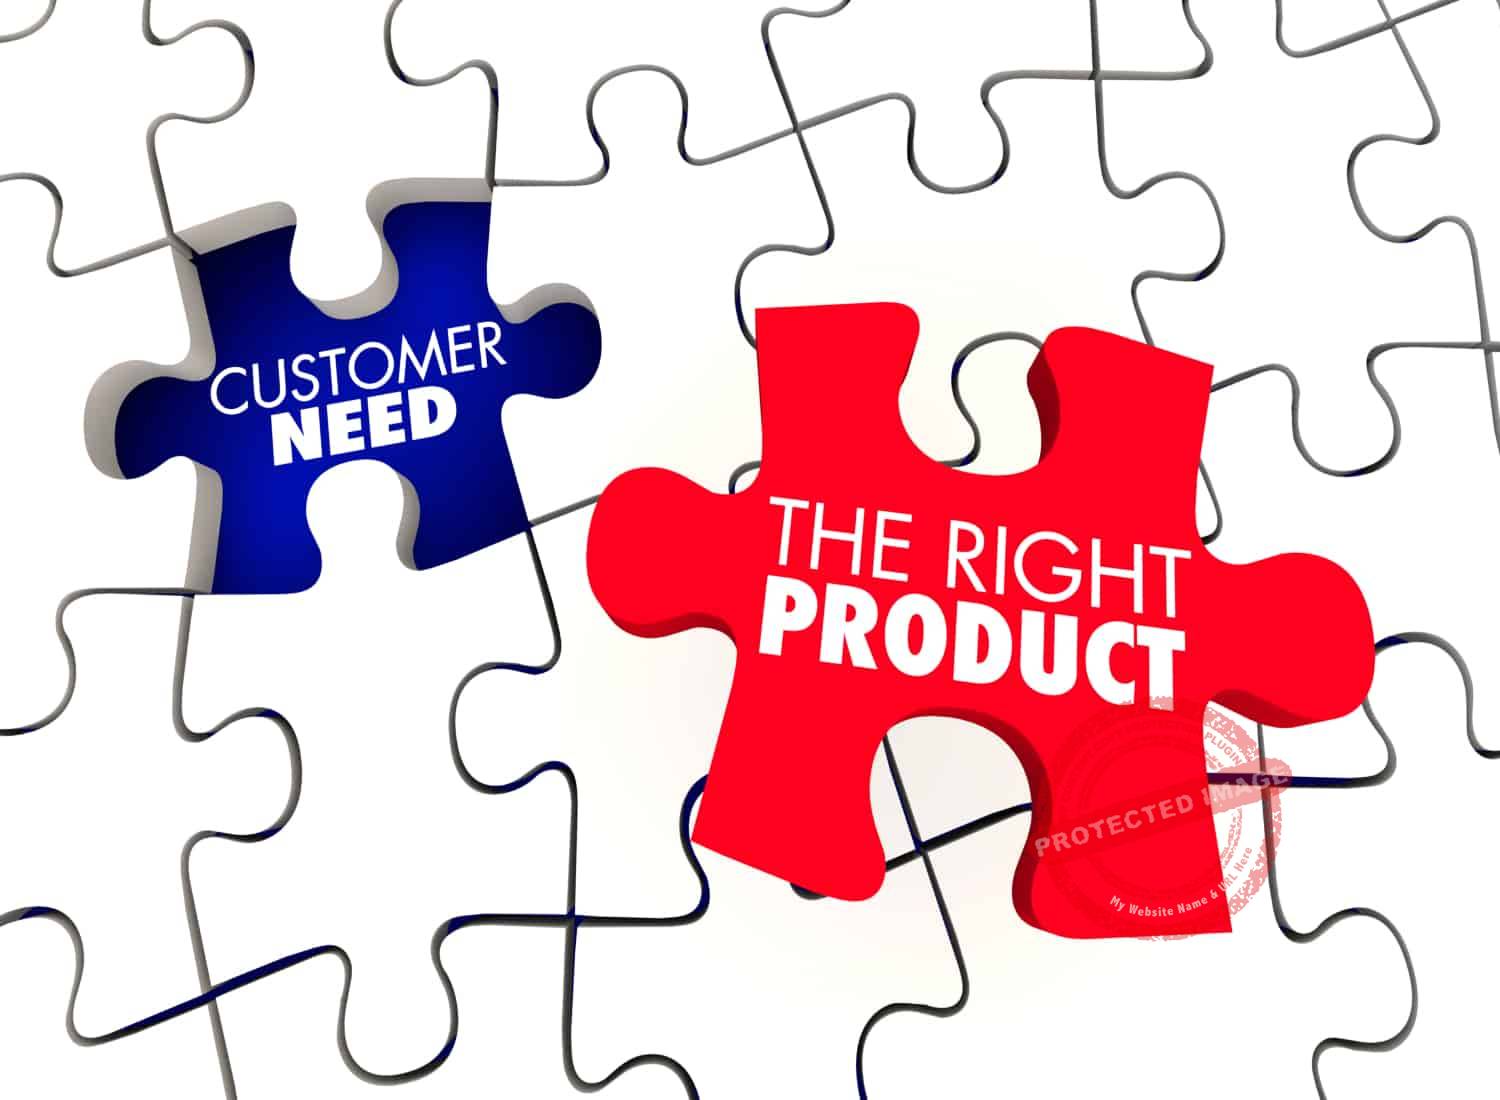 Right customer. Customer needs. Пазлы безопасность. Products and customers. Right product.